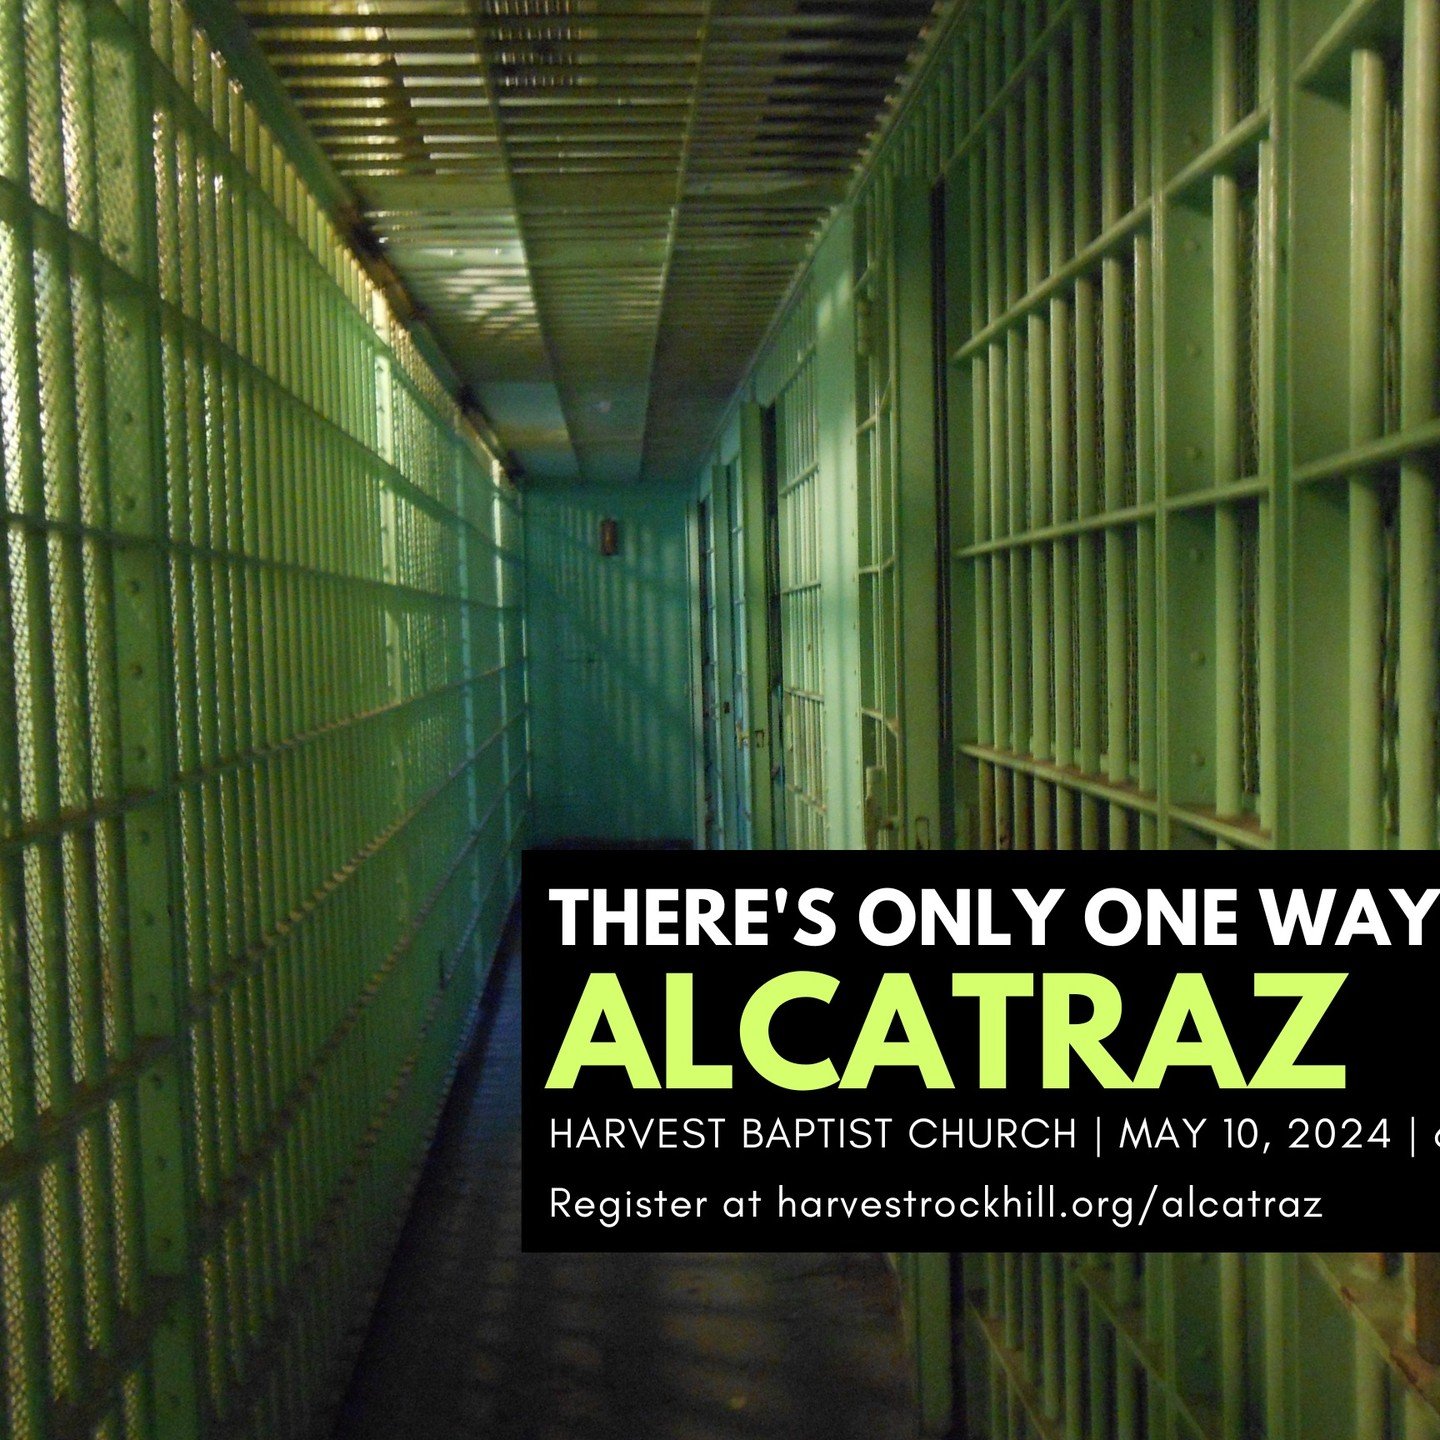 ALCATRAZ is two weeks from today!